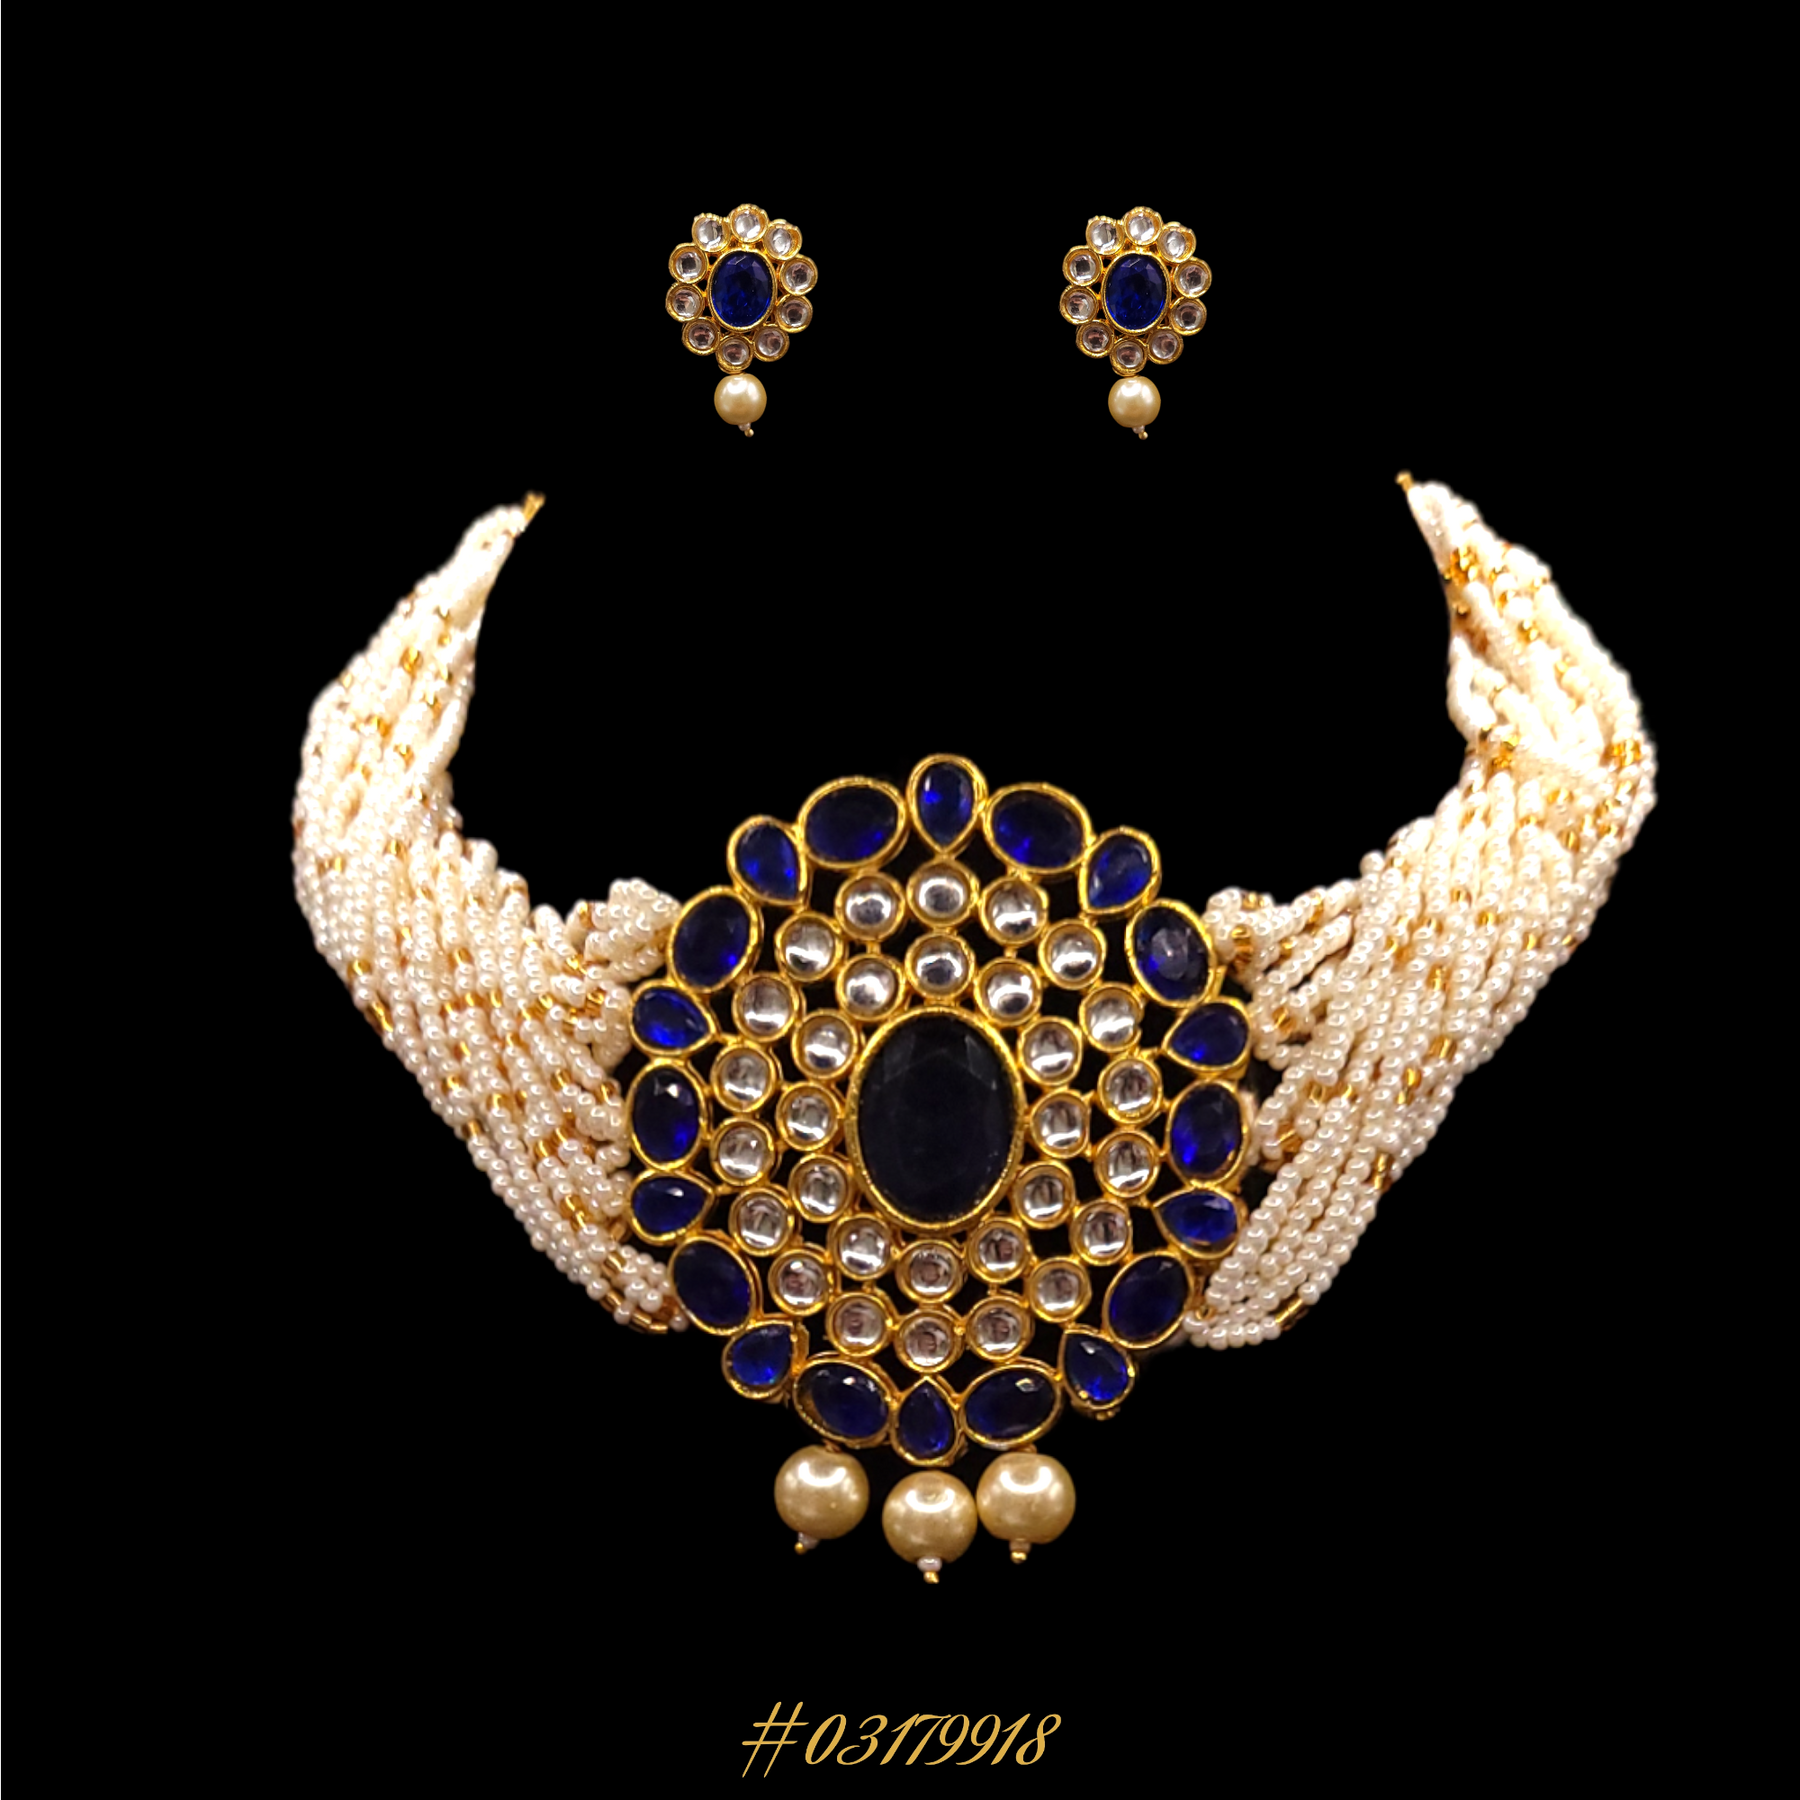 DESIGNER BEADED PEARL NECKLACE, NAVY BLUE STONES WITH KUNDAN EARRINGS & GOLD TOUCHES